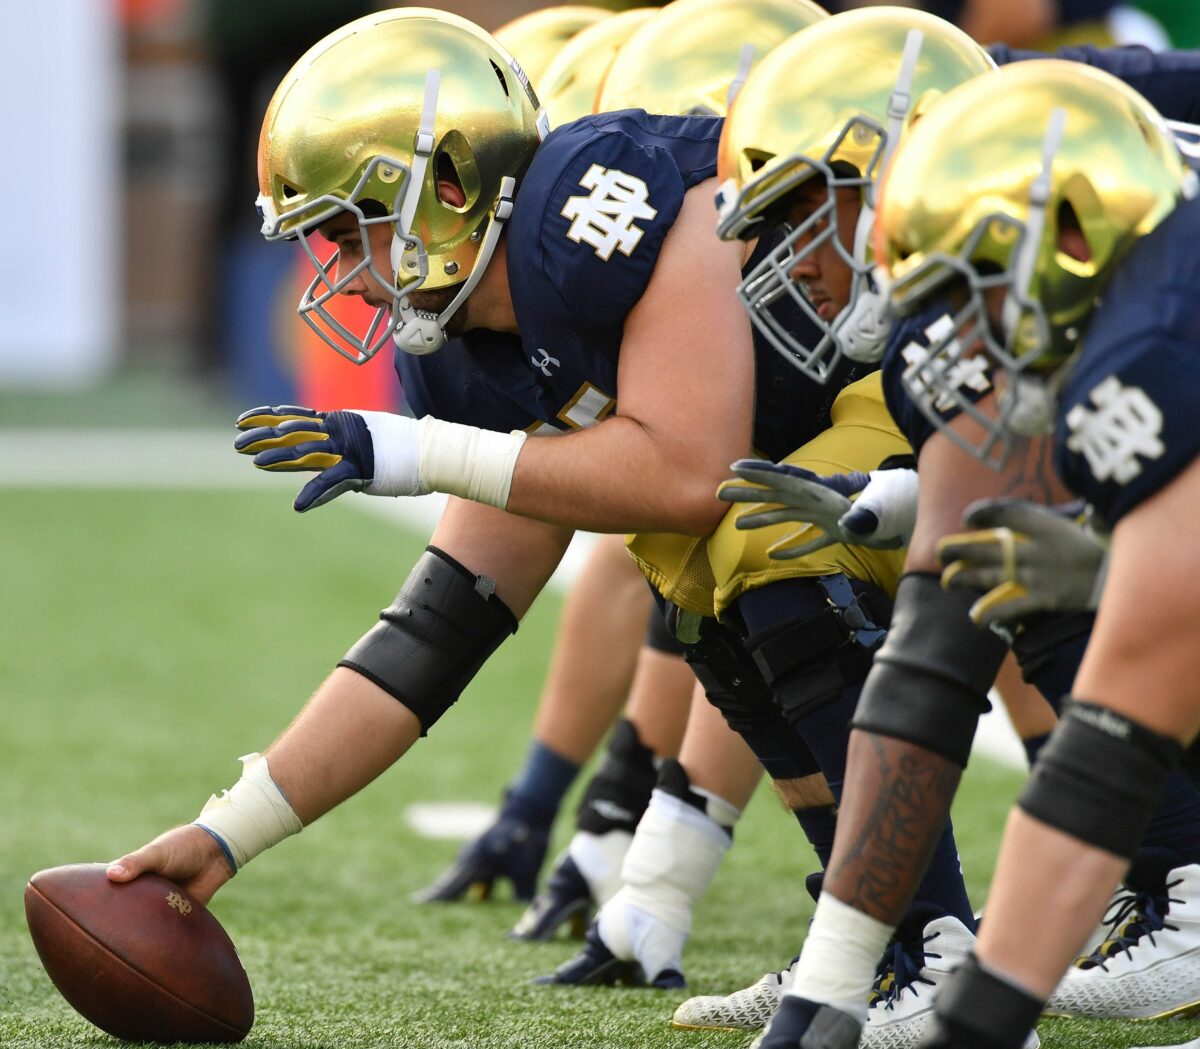 Draft fact further solidifies Notre Dame as ‘O-Line U’